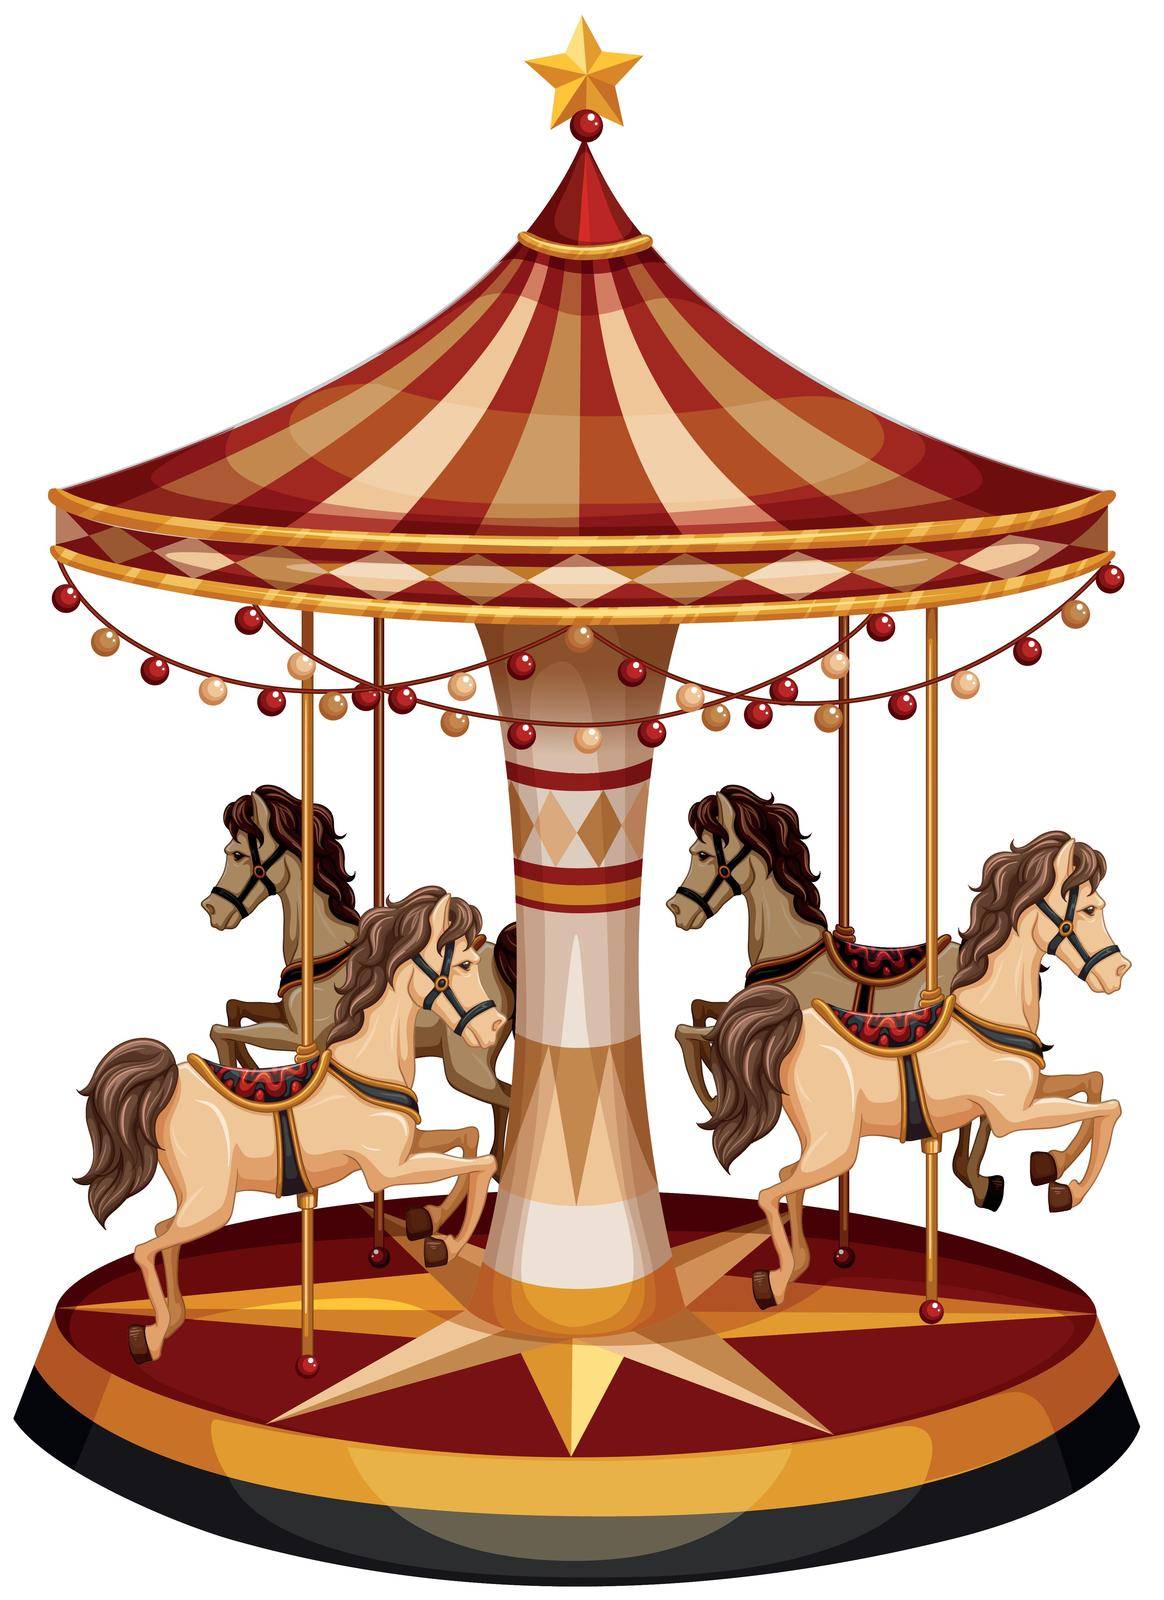 Illustration of a merry-go-round with brown horses on a white background